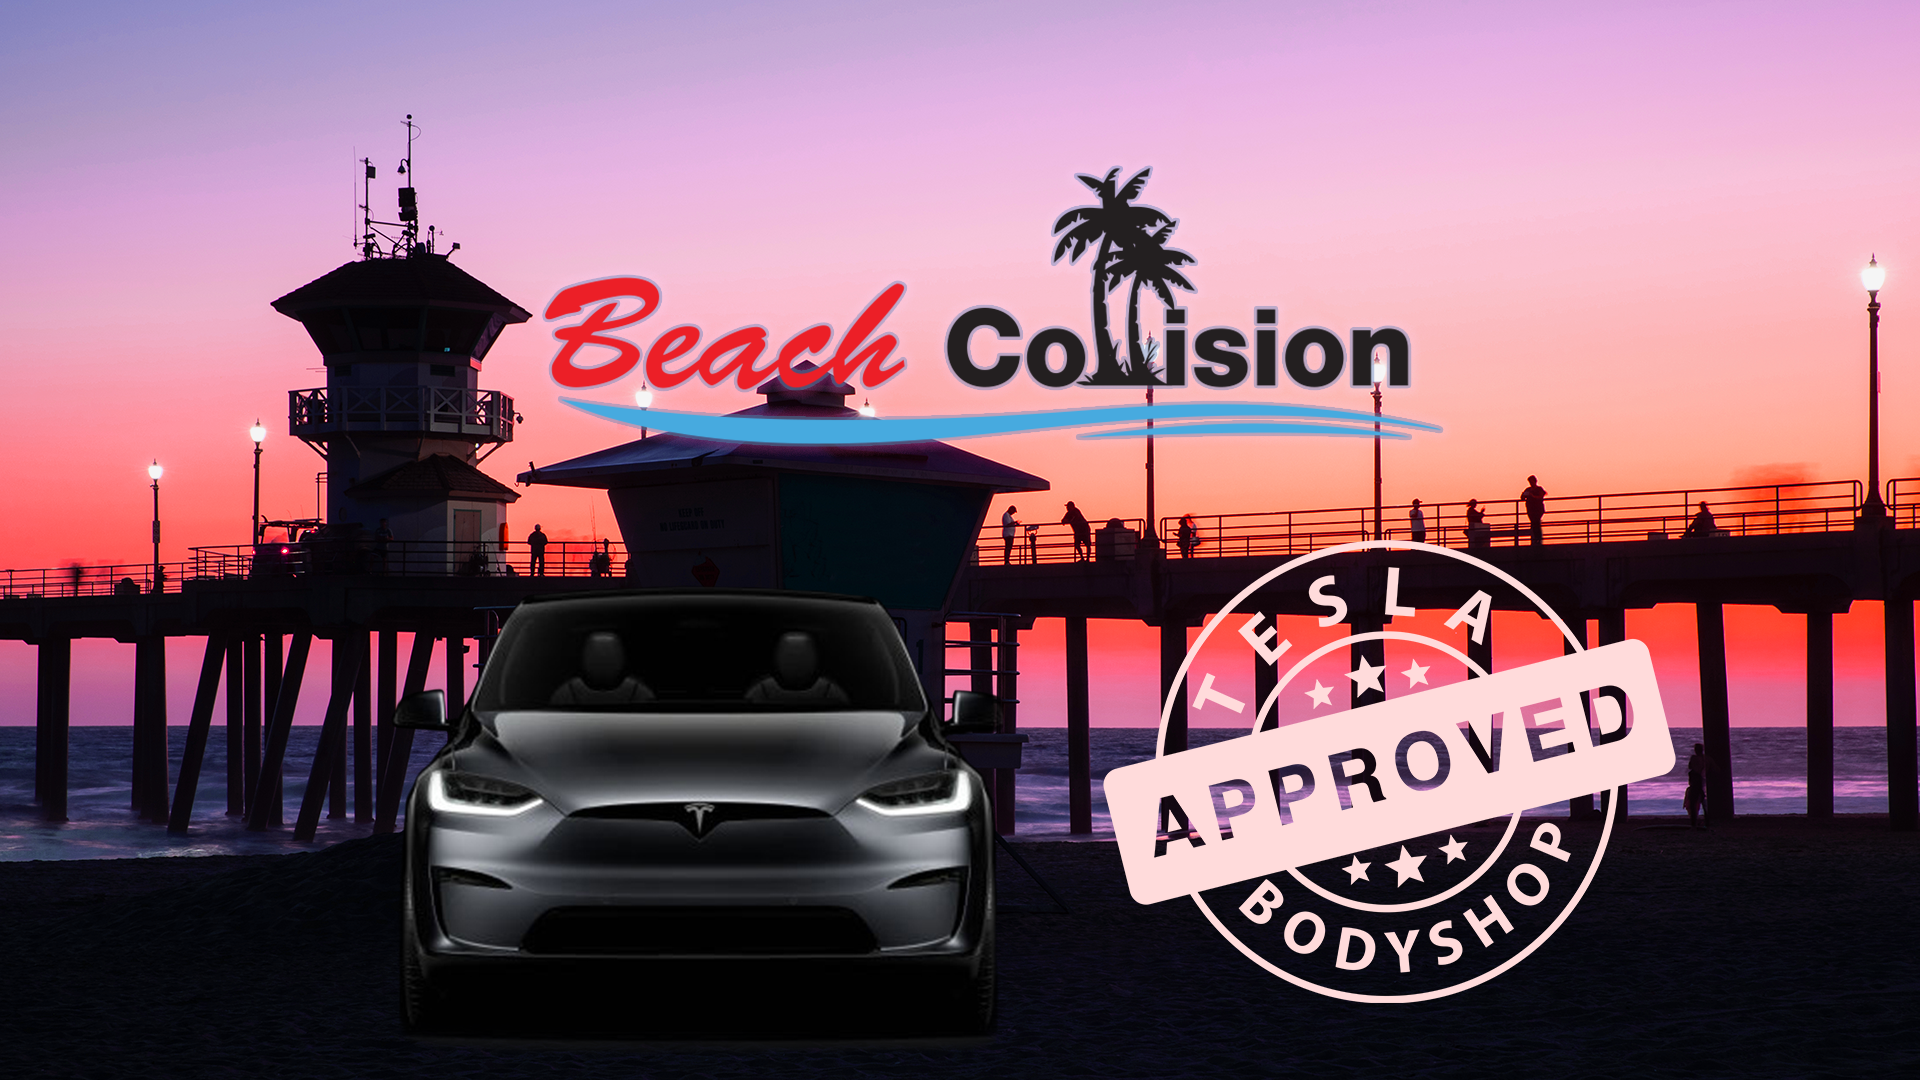 Beach Collision LLC the Tesla Approved Body Shop for Orange County California